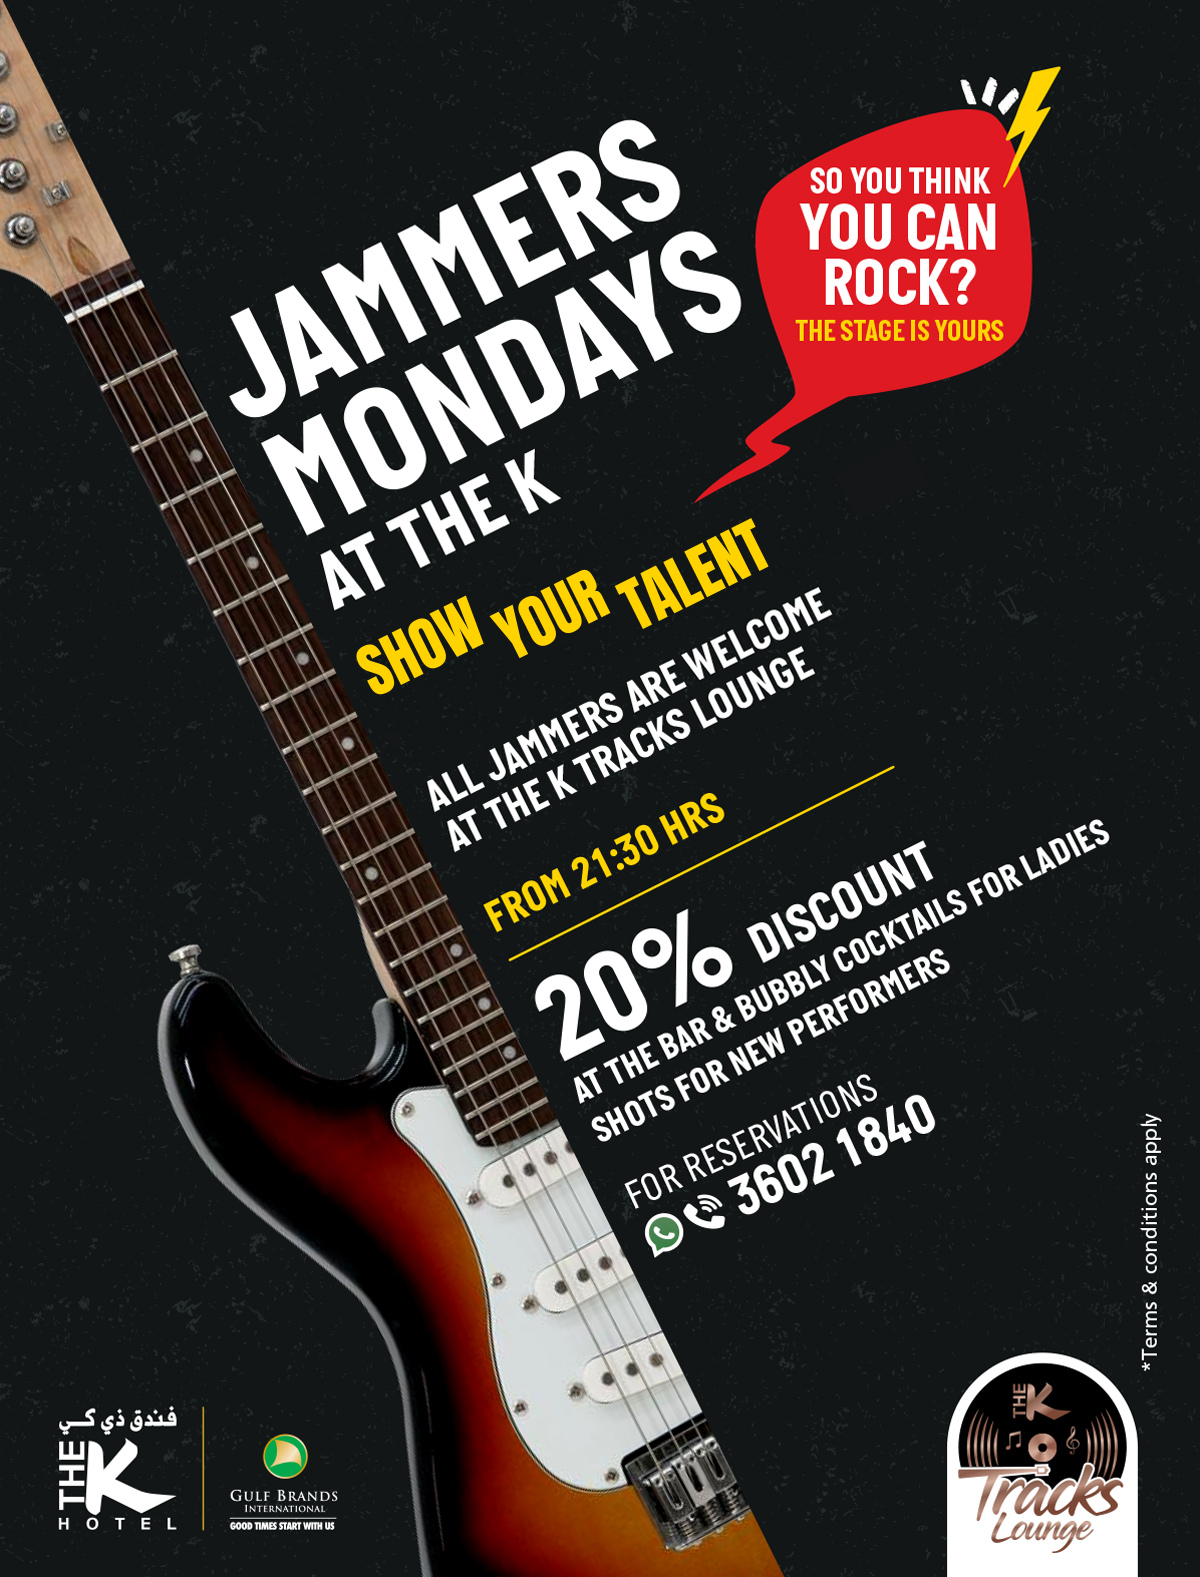 Jammers Monday